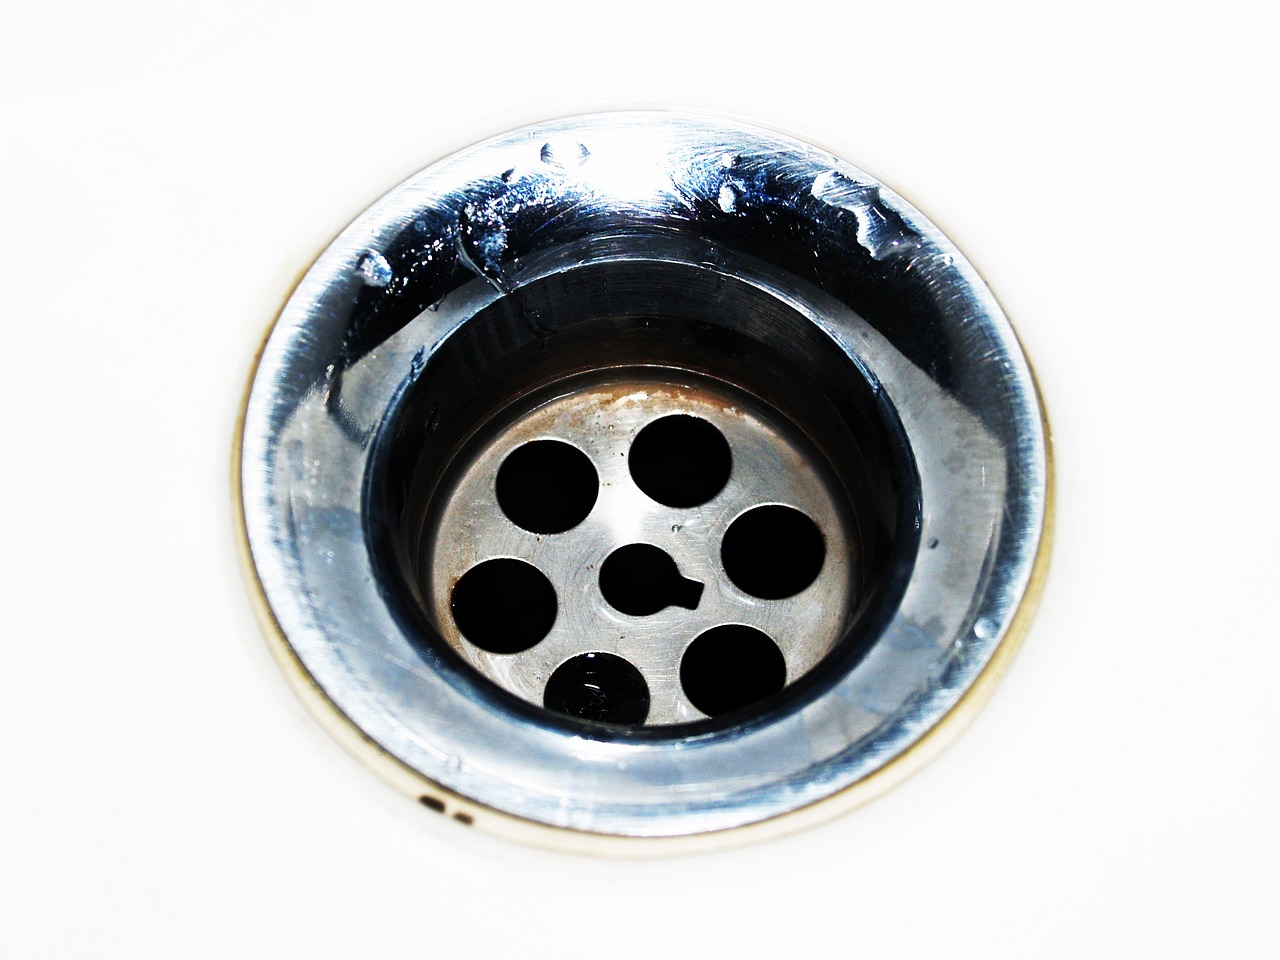 How to Clean Kitchen Drains: Step-by-Step Guide